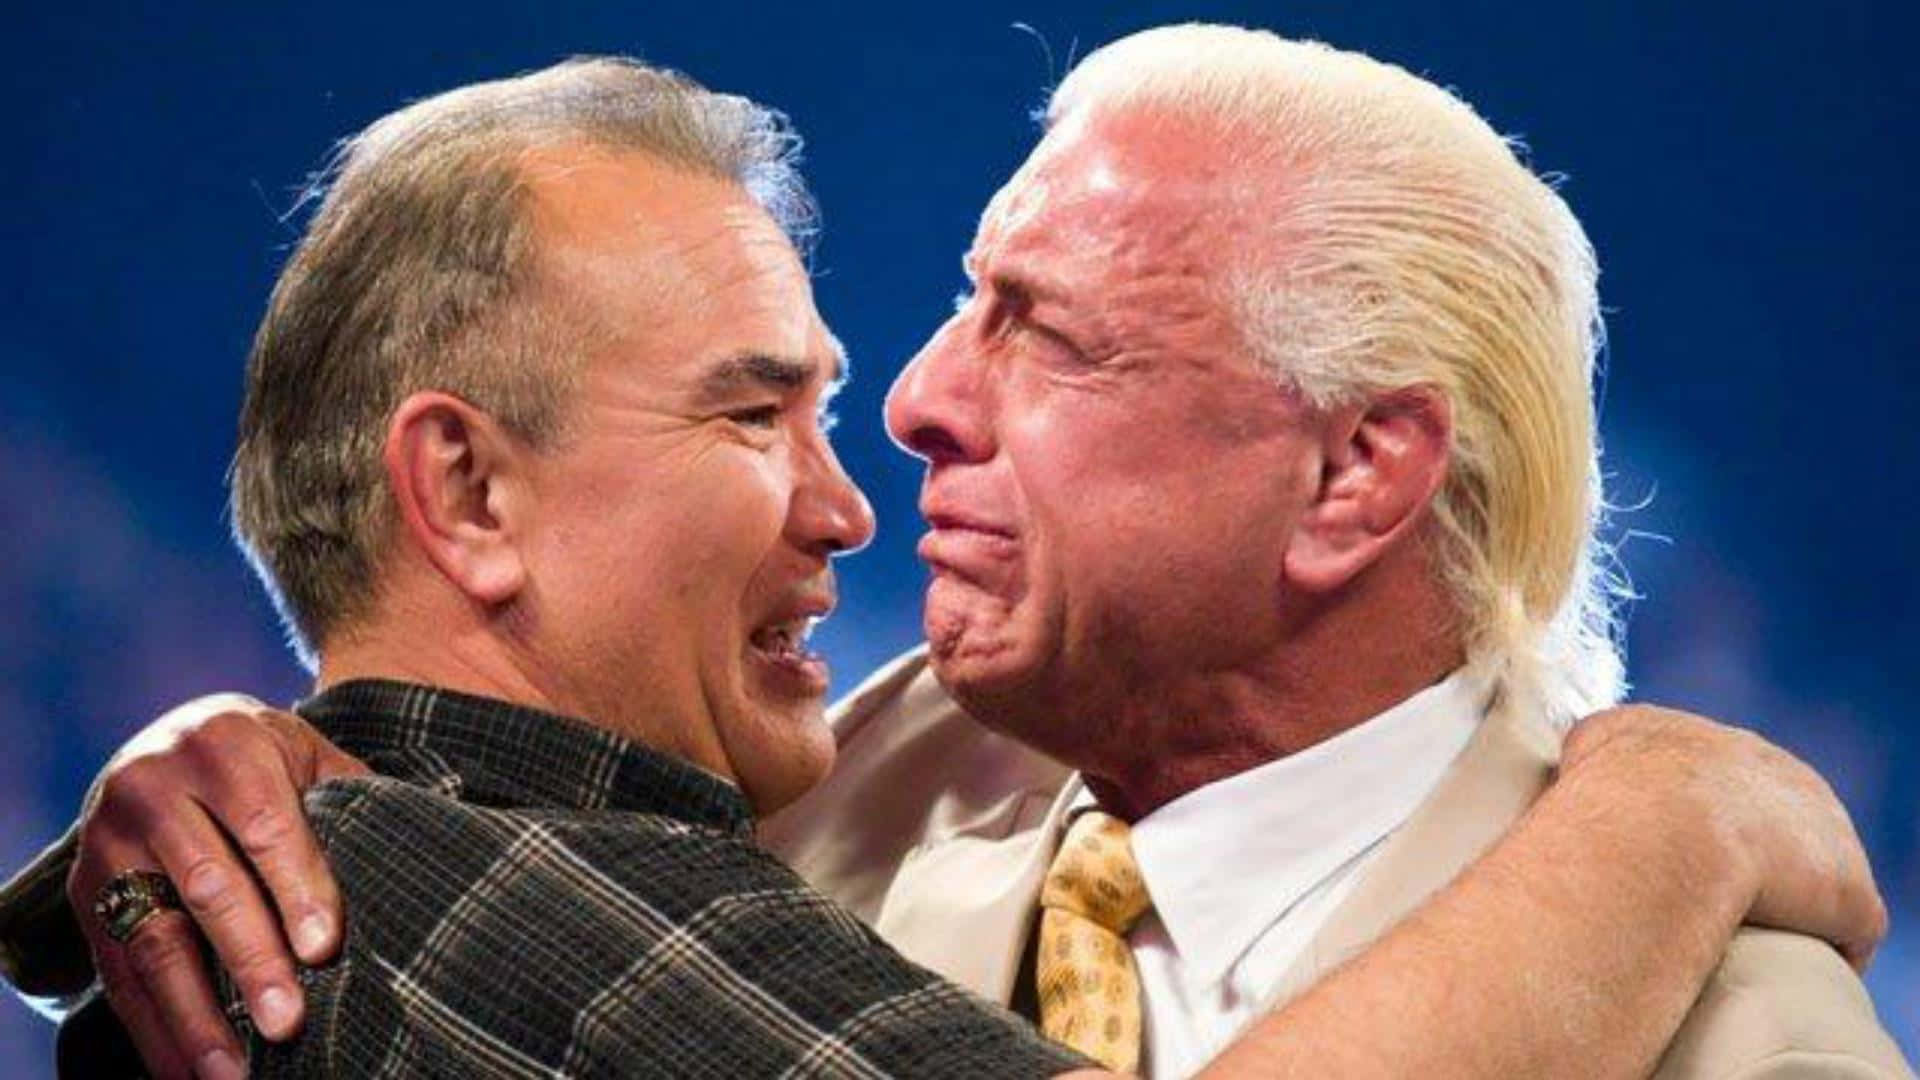 Renowned Wrestlers Ric Flair And Ricky Steamboat Sharing A Moment